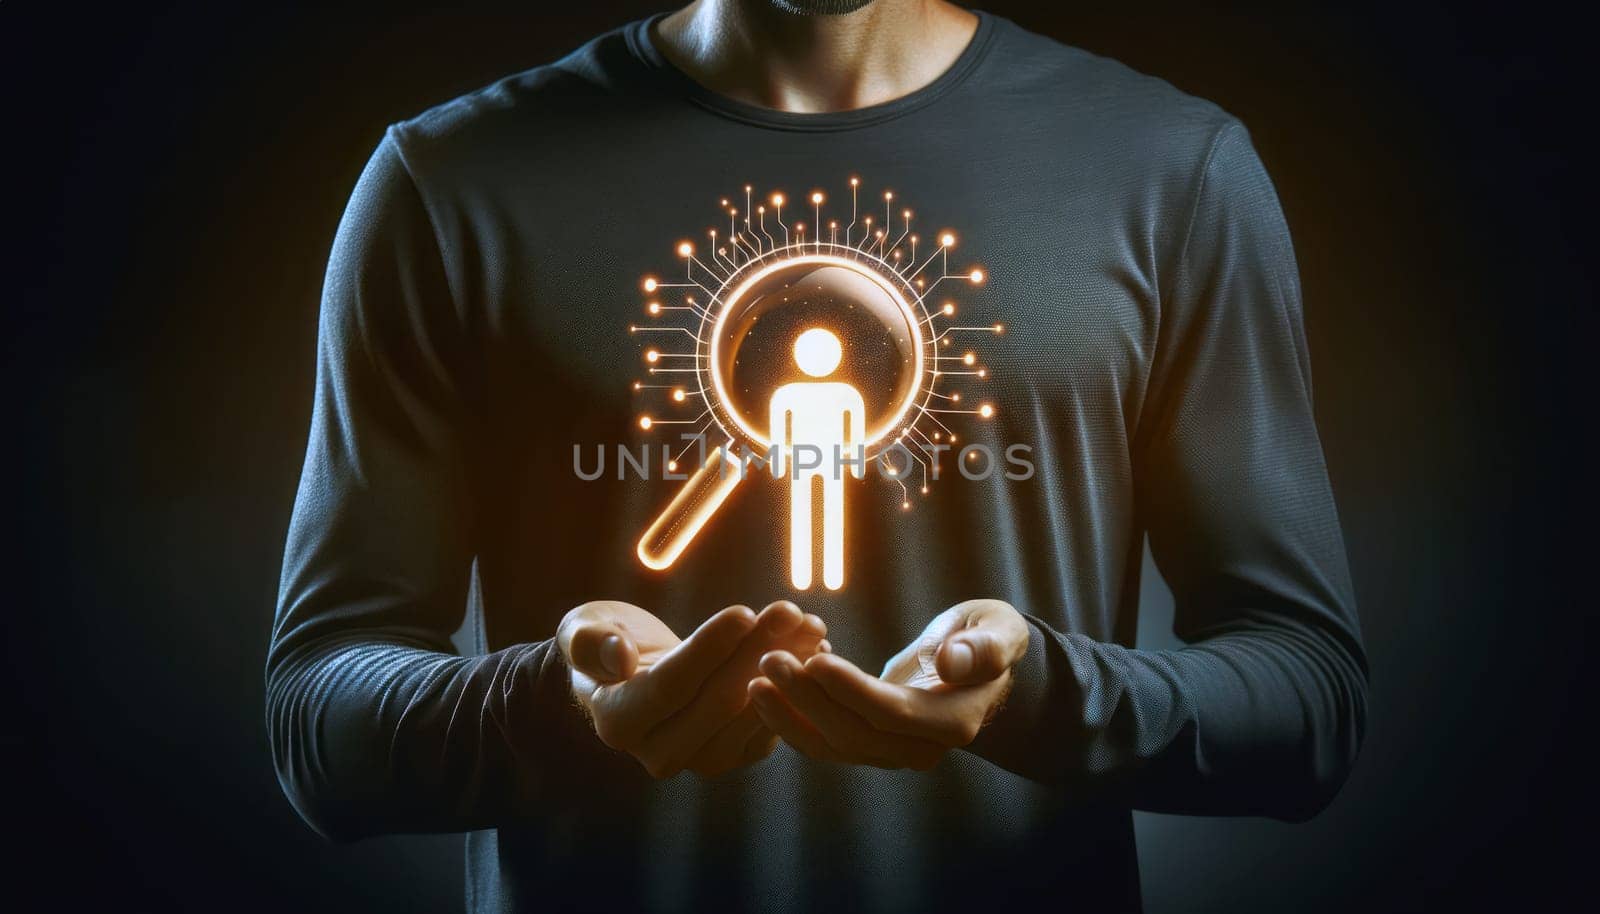 A digital illustration of a person in a dark gray shirt with their palm open, holding a glowing graphic of the letters 'HR' with a magnifying glass positioned over the 'R', inside which is a stylized figure of a person. The letters and the magnifying glass symbolize human resources and recruitment. The background is dark, focusing the viewer's attention on the glowing graphic and the hand gesture. The person's face is not visible in the frame, which emphasizes the symbolic representation of HR in the image.